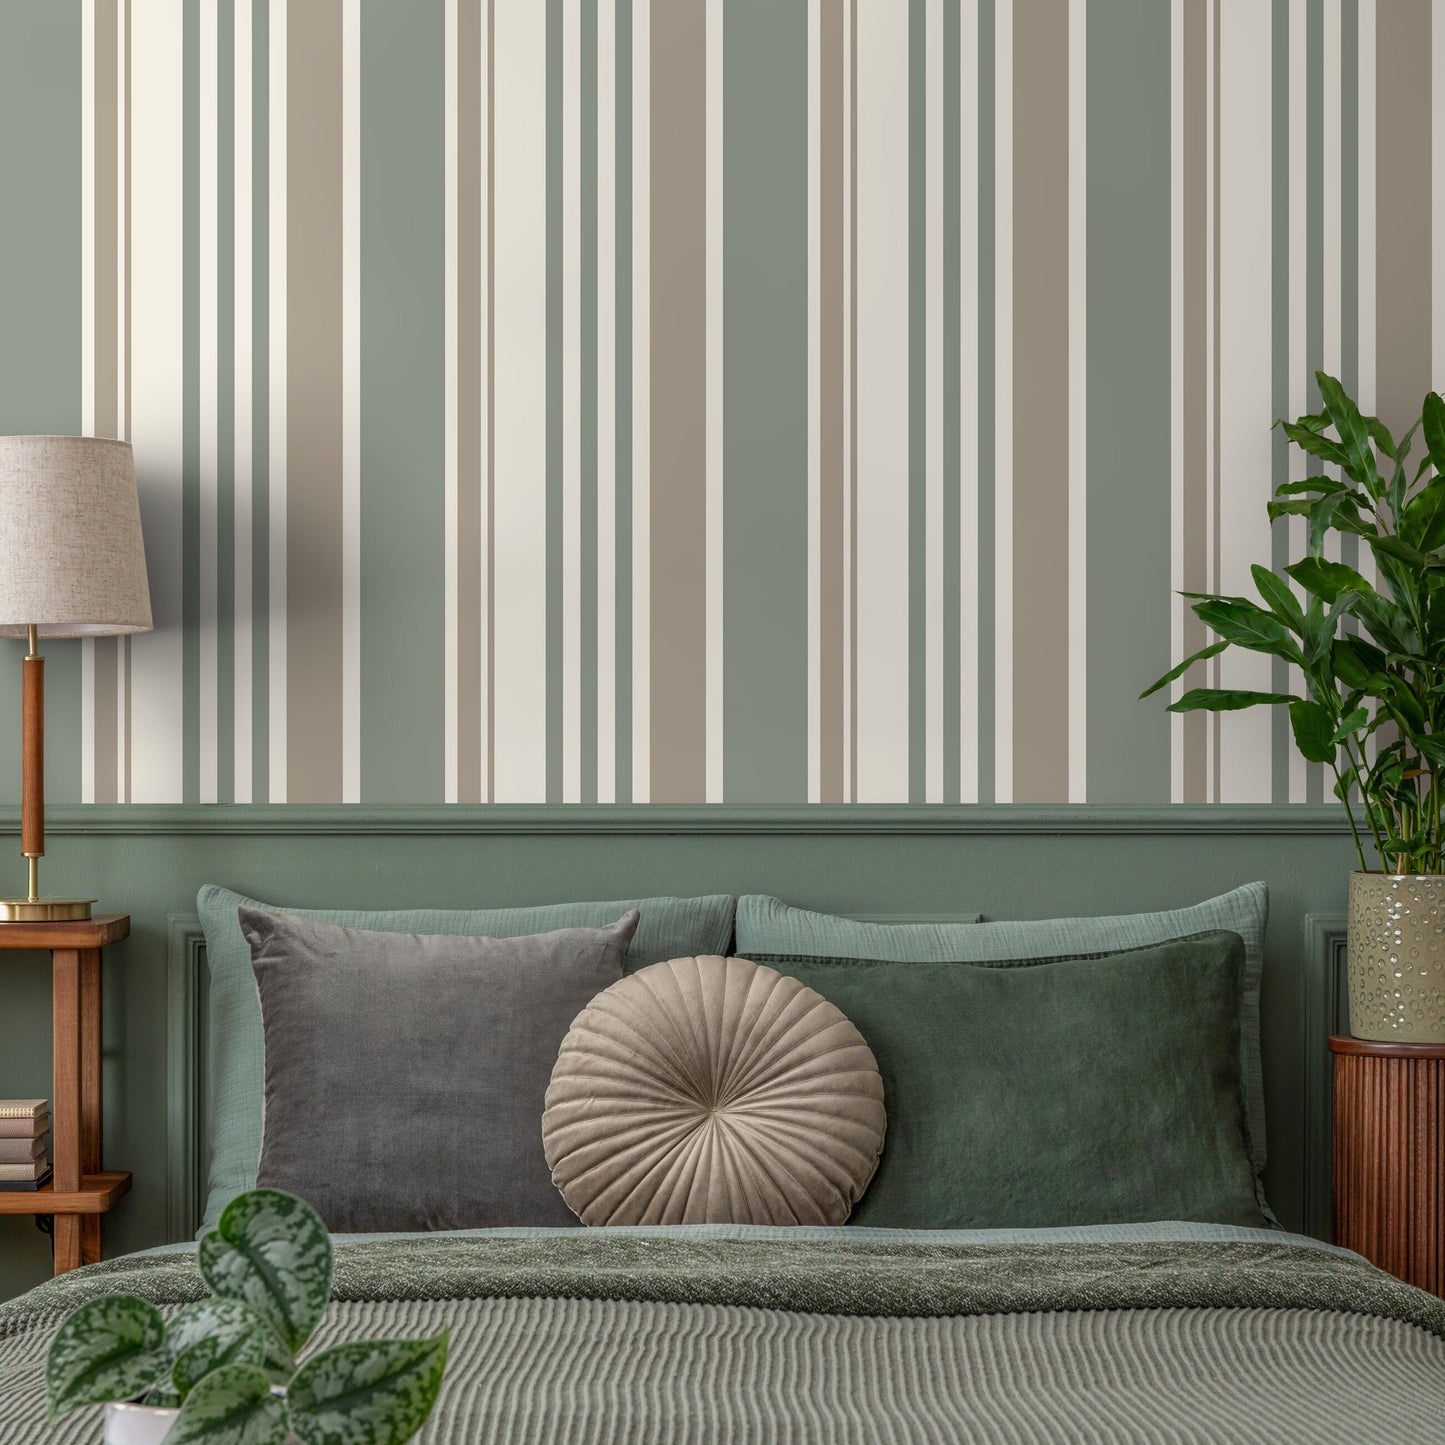 Vertical Striped Wallpaper Green and Grey Wallpaper Peel and Stick and Traditional Wallpaper - D808